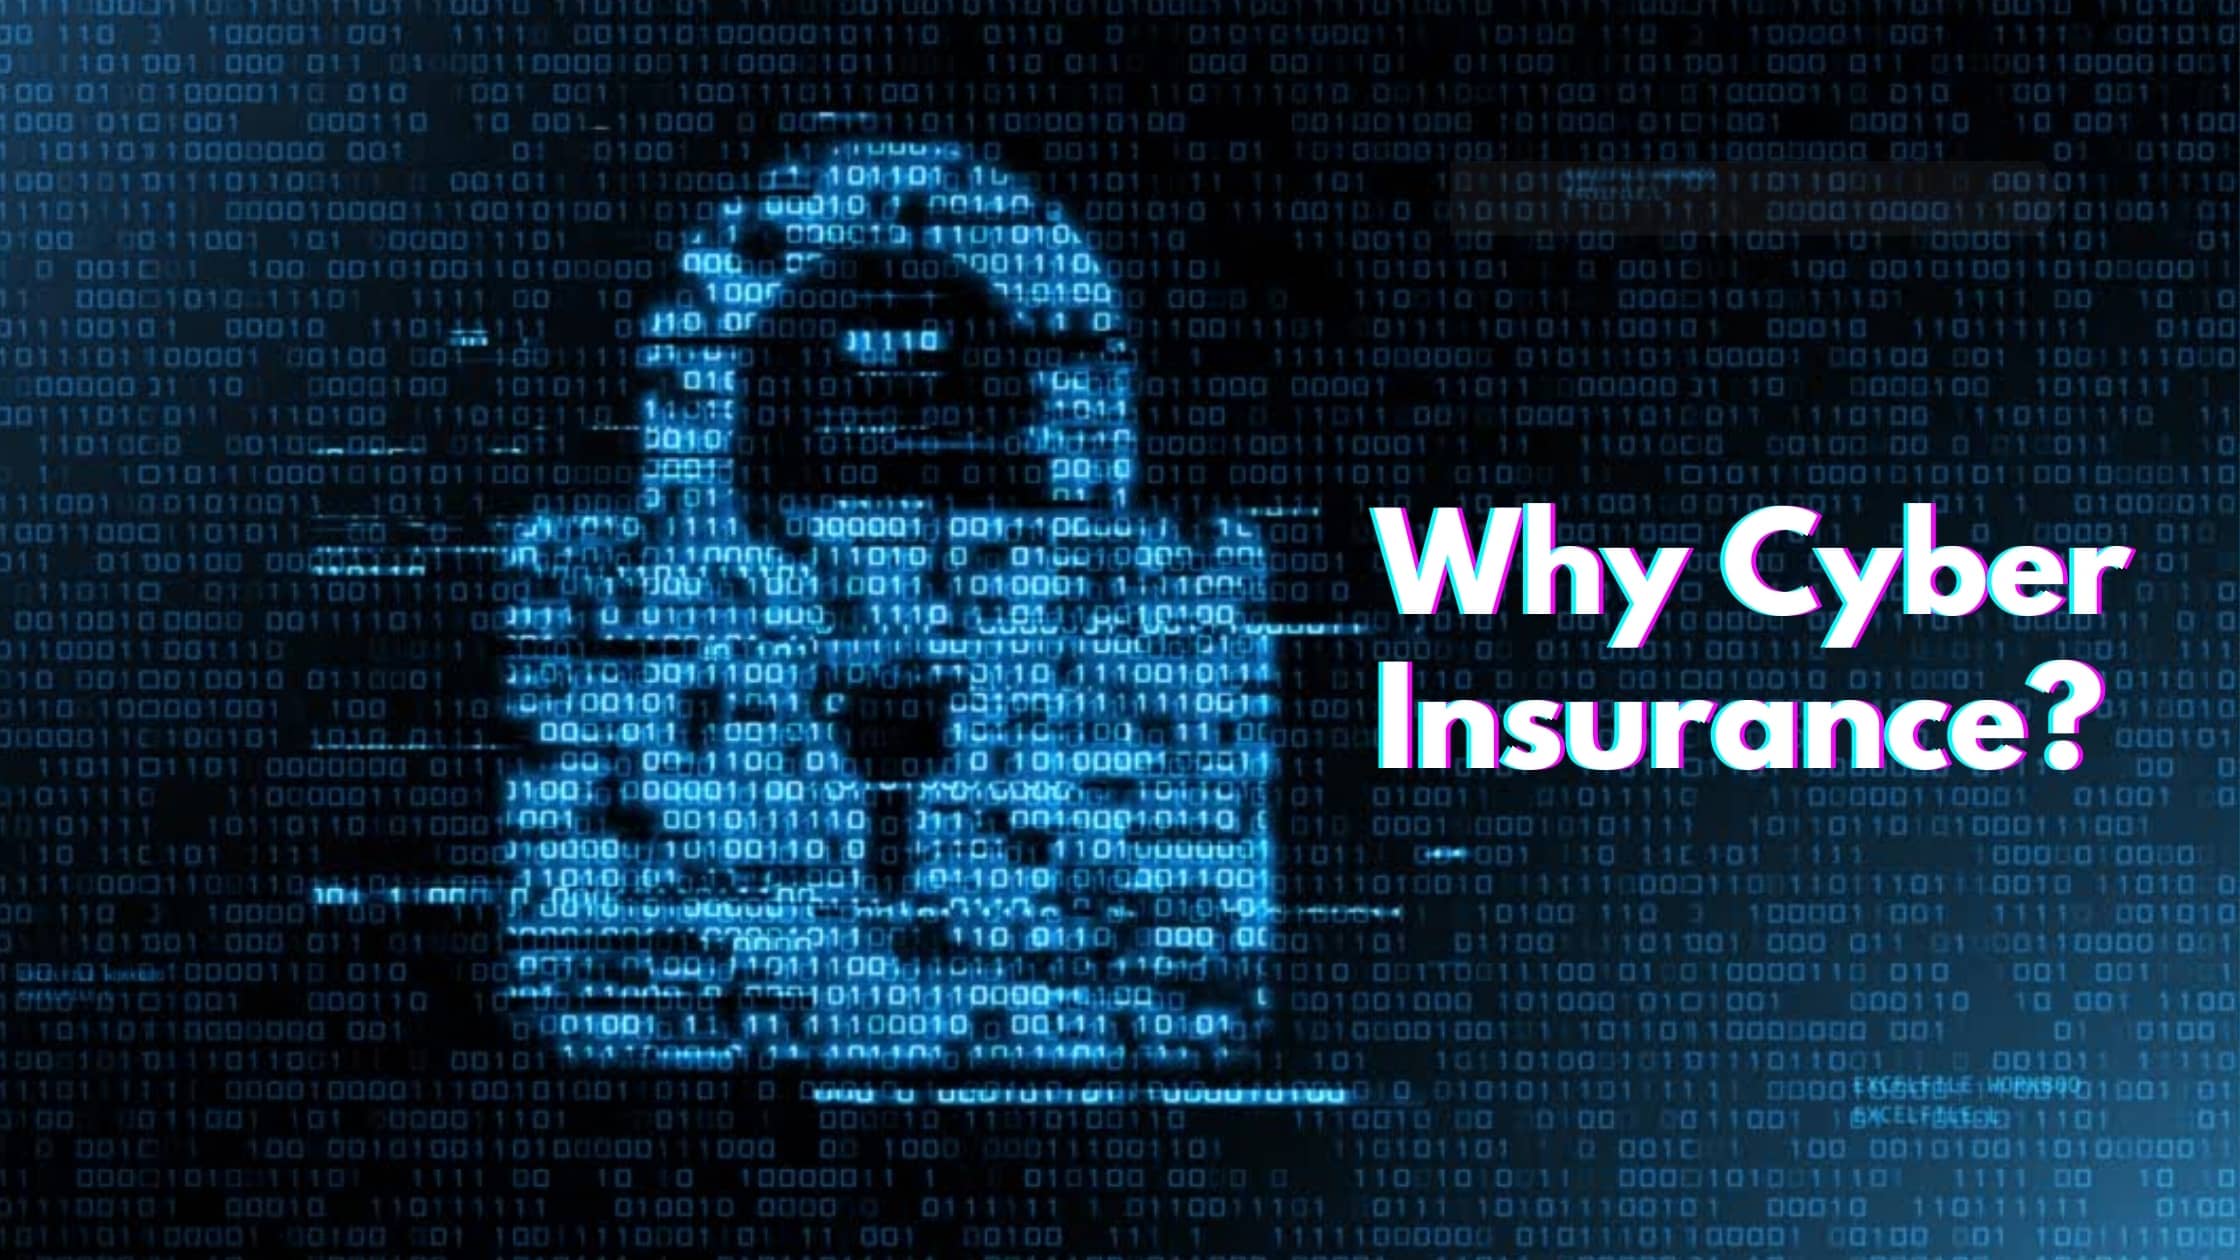 Gam Tech's blog article explains why small to medium-sized businesses would benefit from cyber insurance.